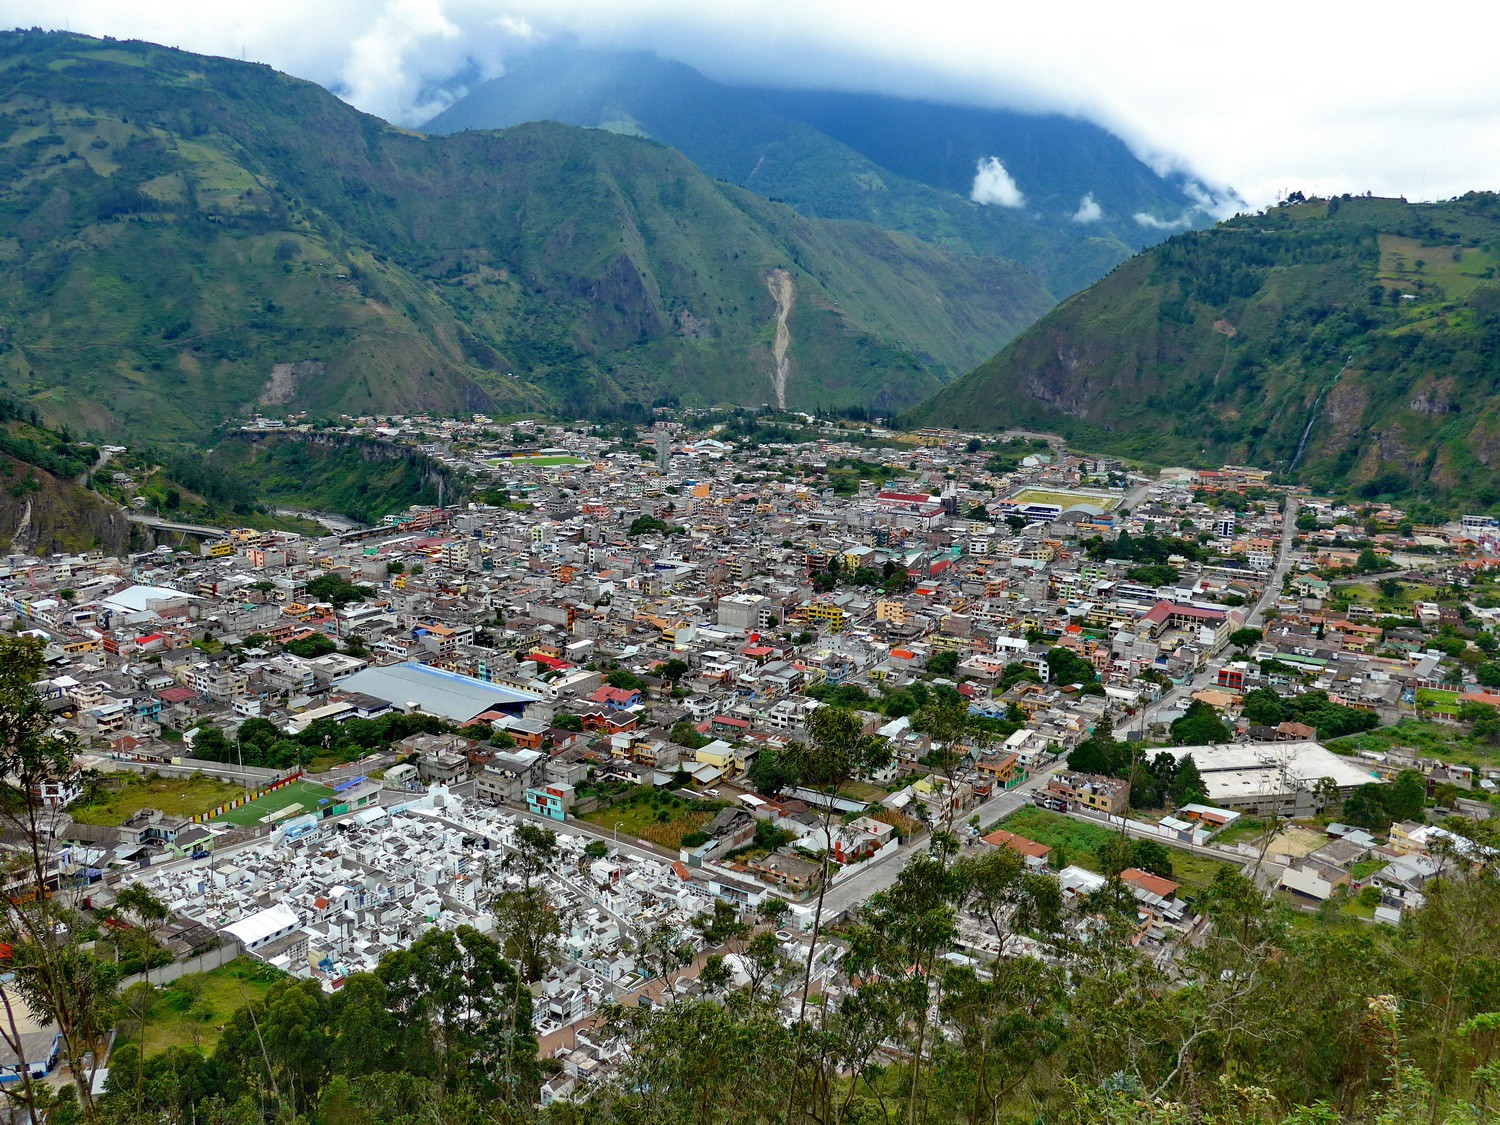 Baños seen from the trail to its virgin